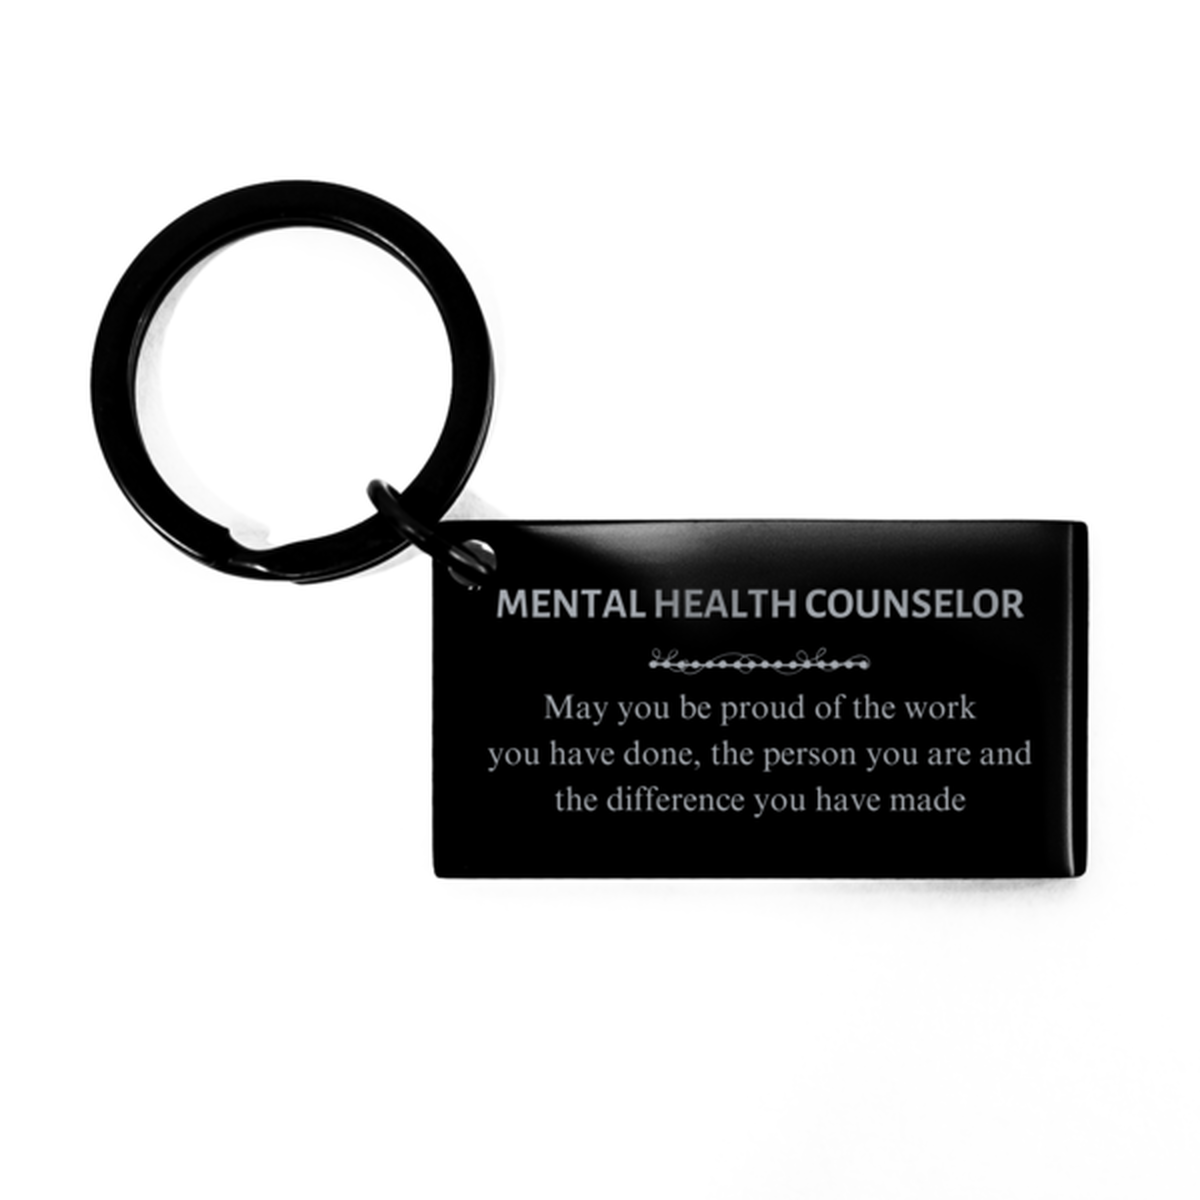 Optometrist May you be proud of the work you have done, Retirement Mental Health Counselor Keychain for Colleague Appreciation Gifts Amazing for Mental Health Counselor